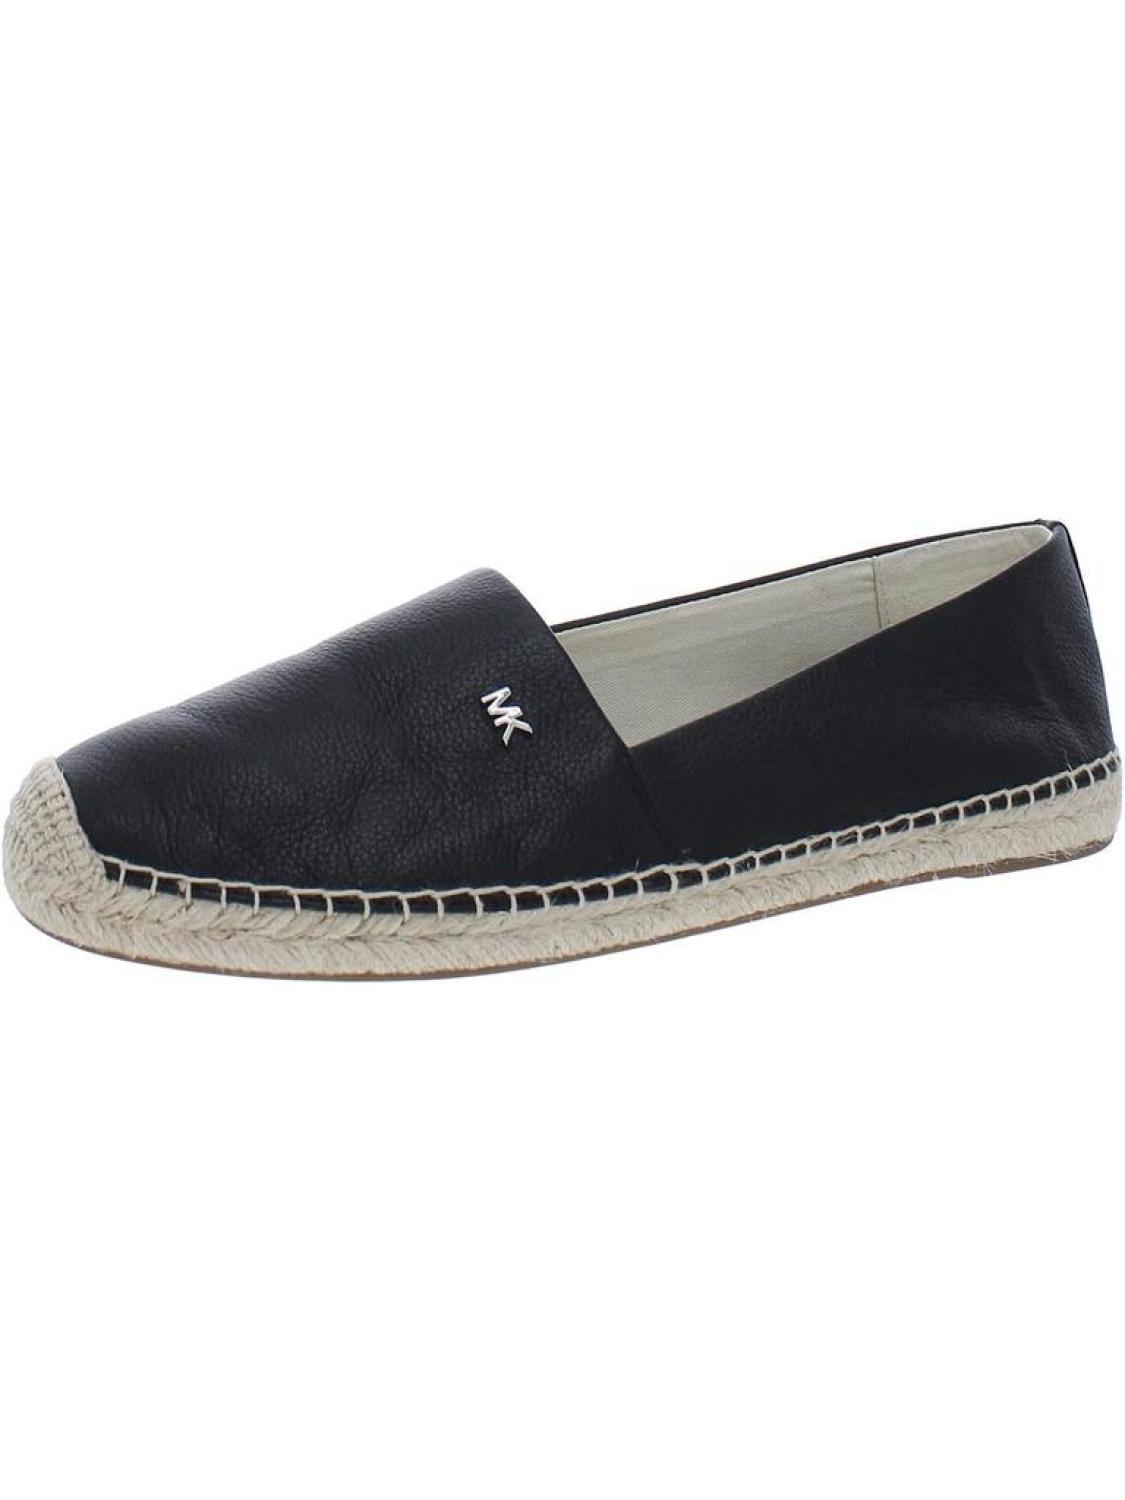 Womens Slip On Flat Loafers